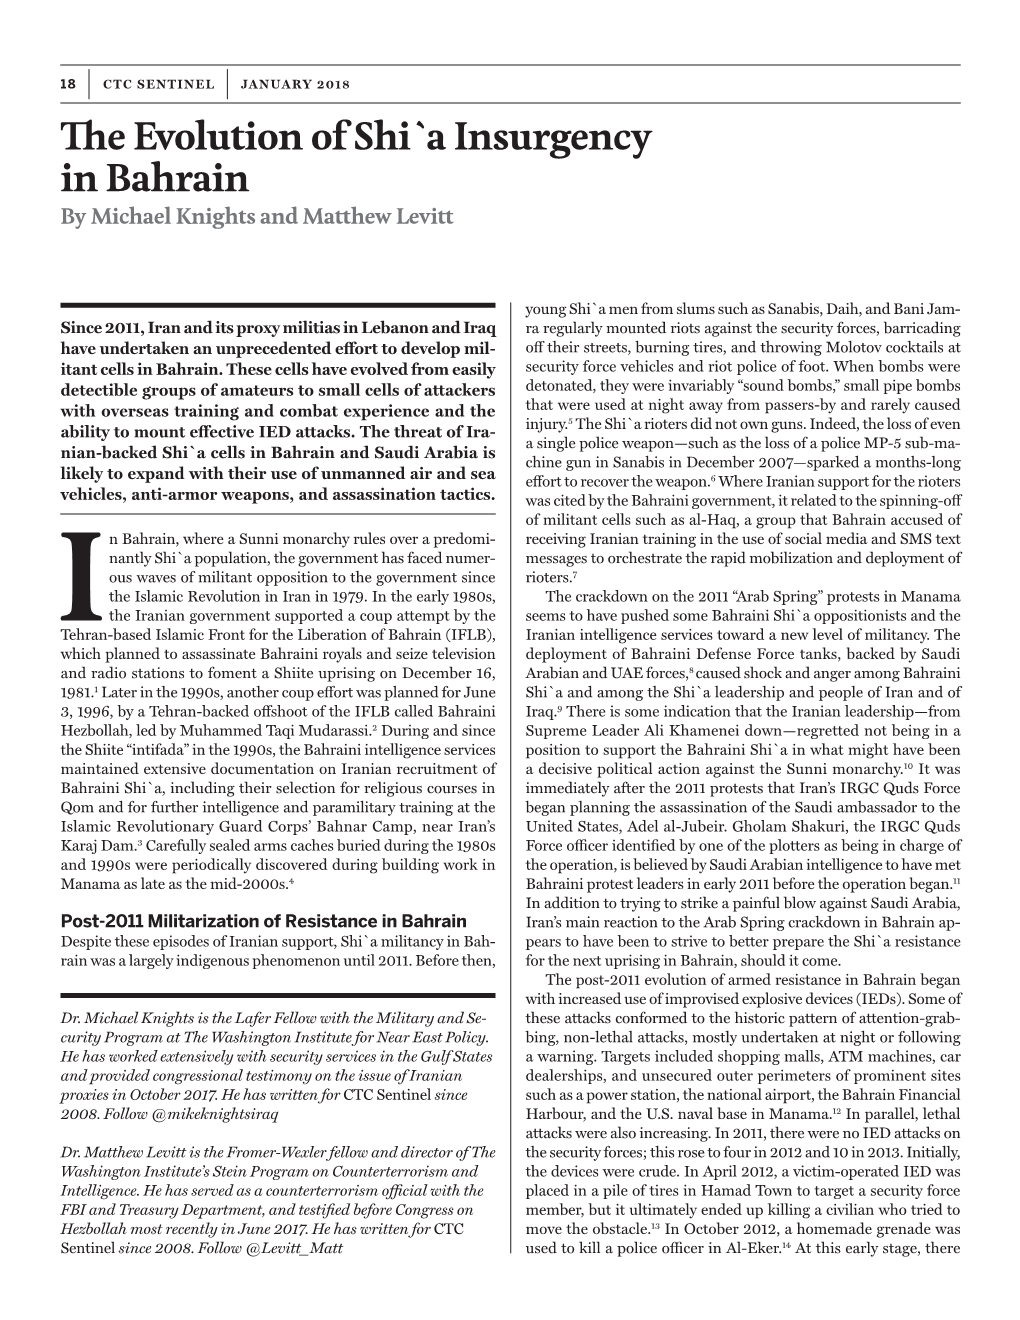 The Evolution of Shi`A Insurgency in Bahrain